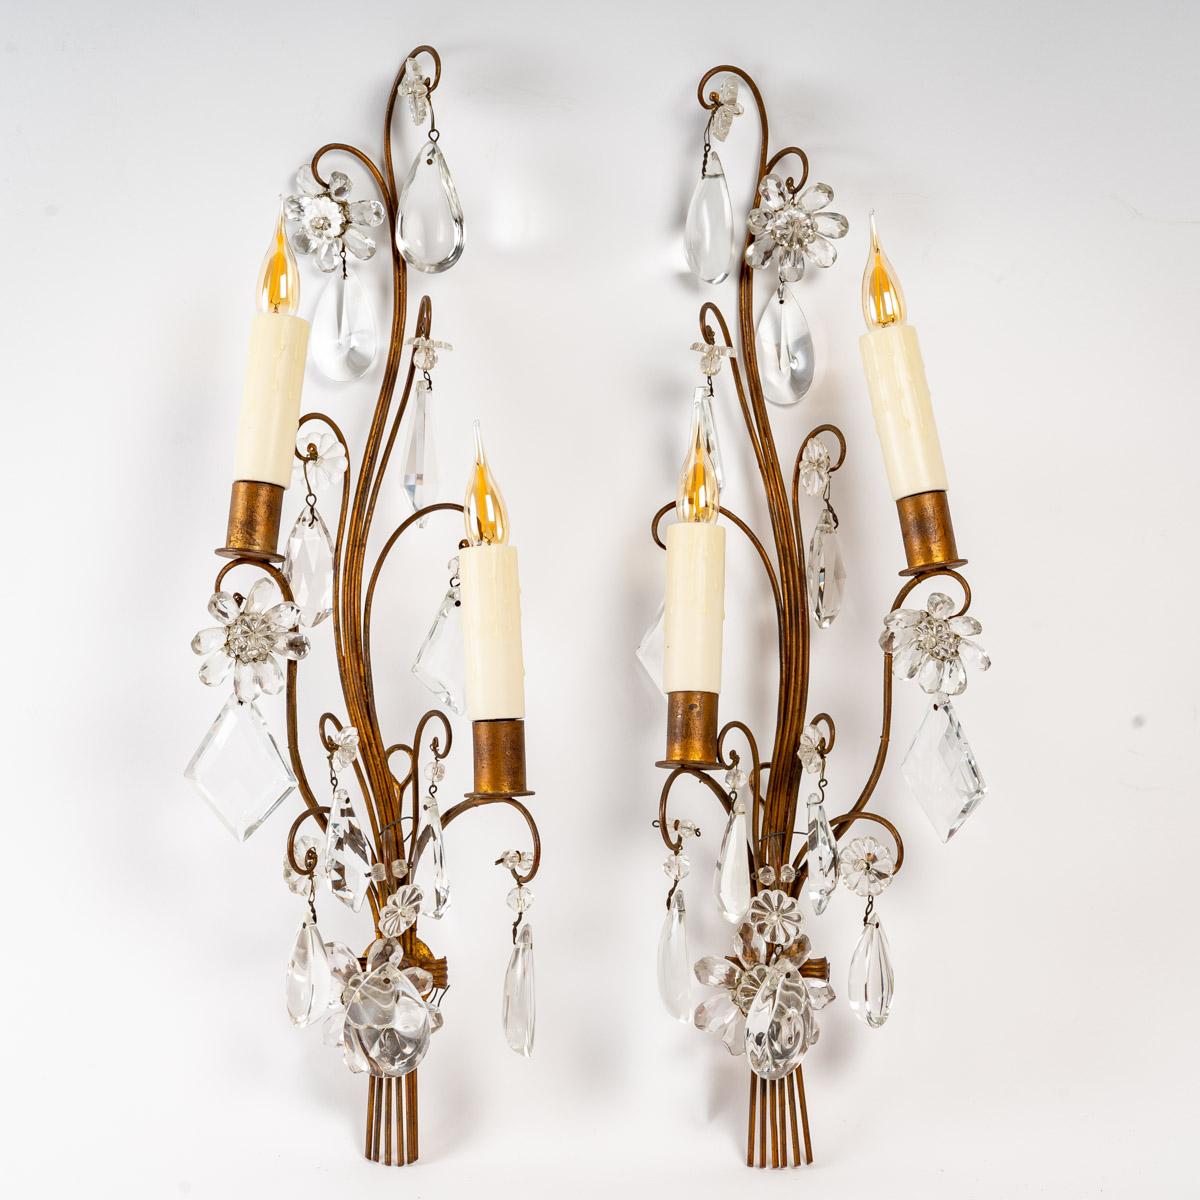 Pair of gilt metal sconces from the Baguès house with 2 lights, mid 20th century, crystal pampille.
H: 60 cm, W: 18 cm, D: 10 cm
ref SM0704